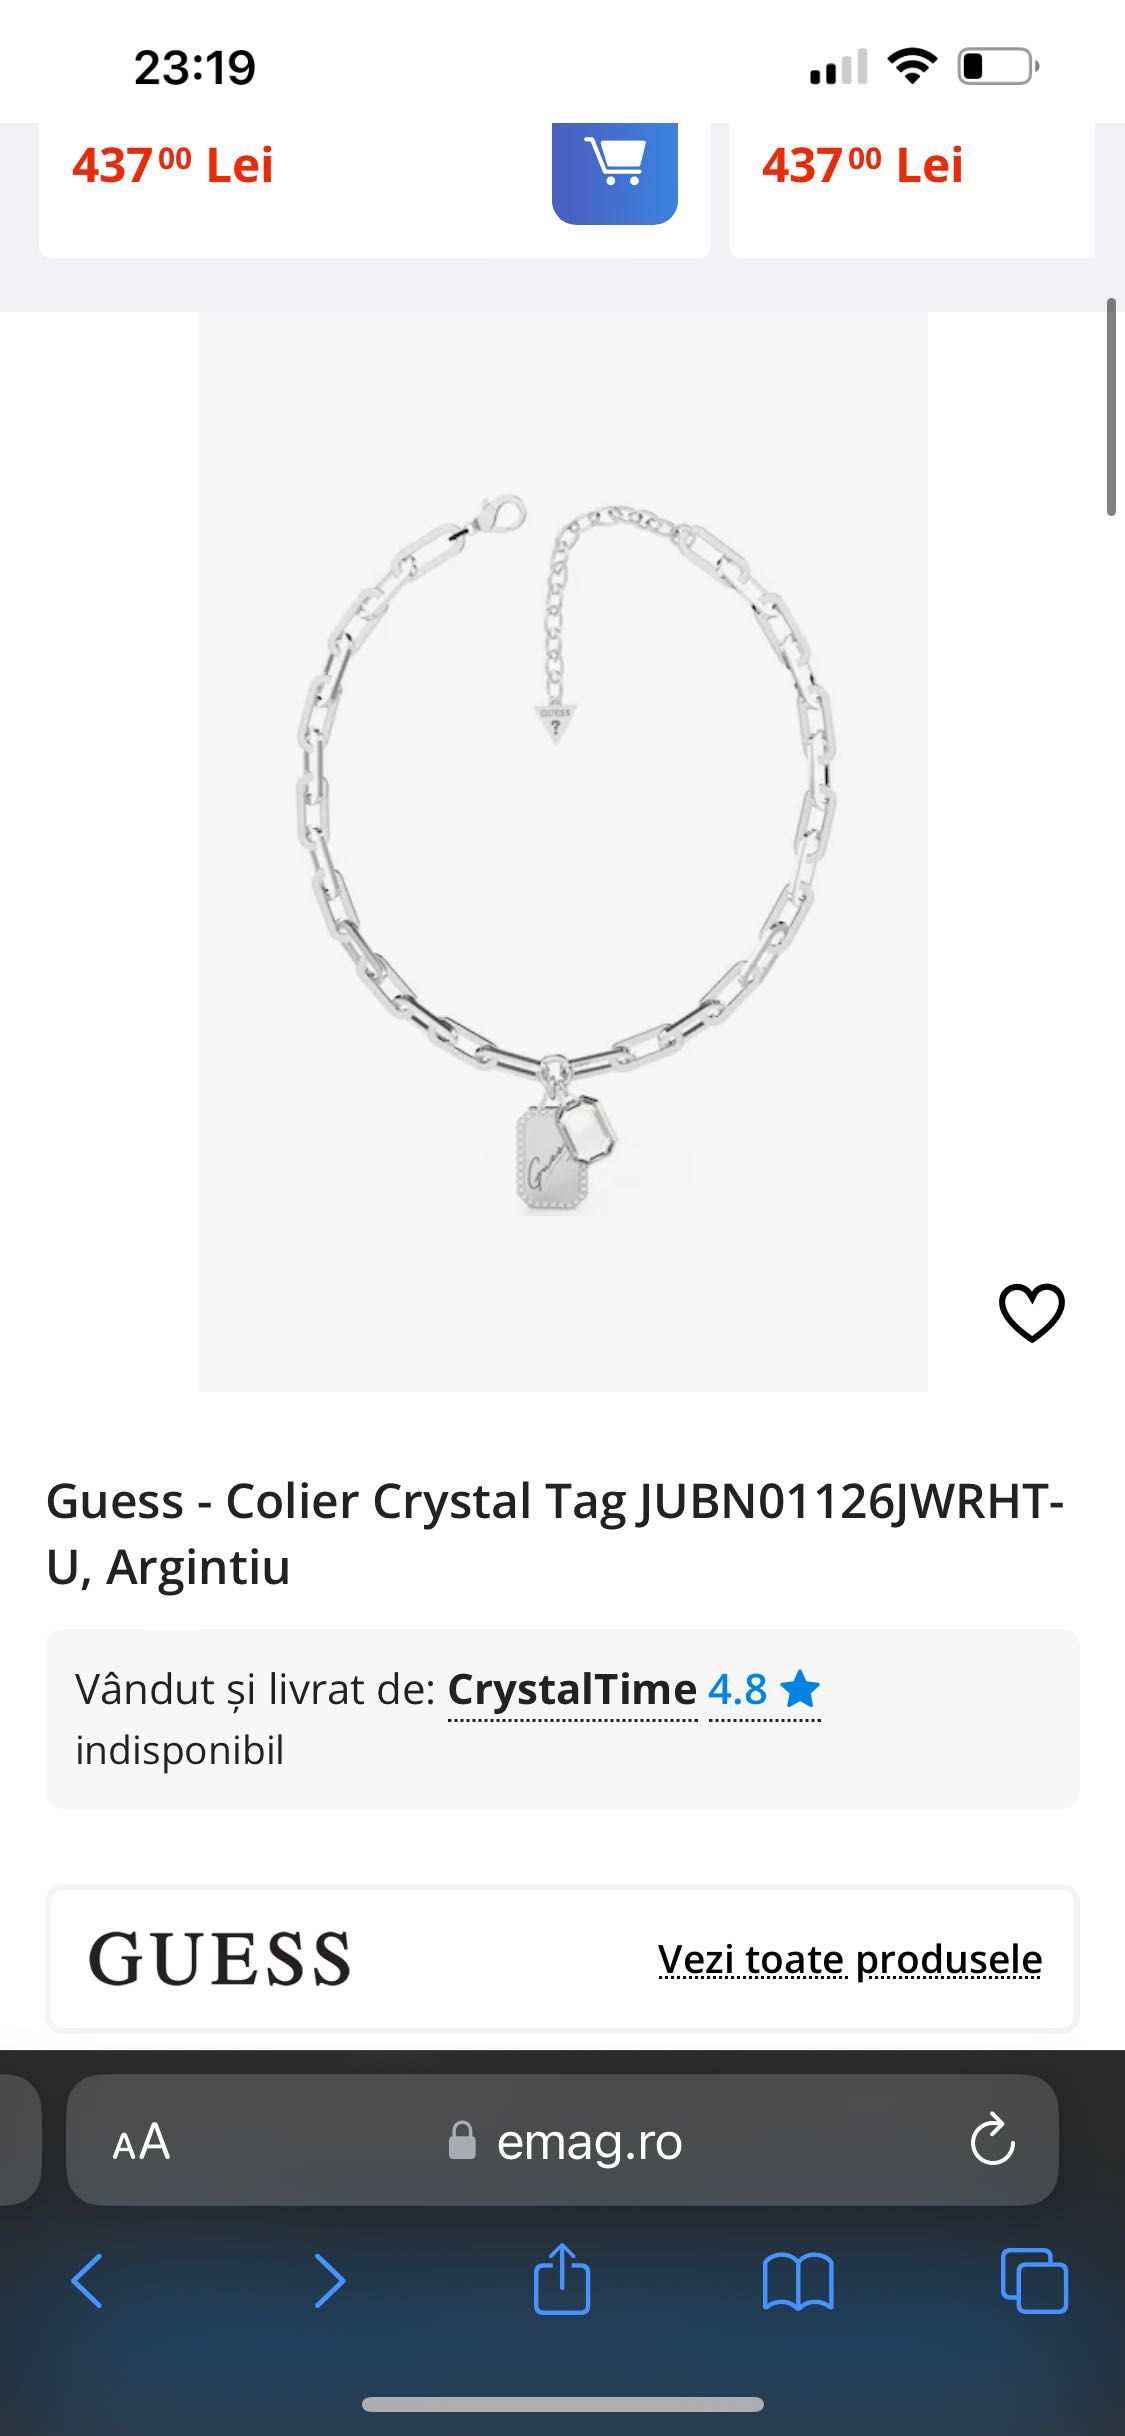 Colier Guess Crystal Tal nou